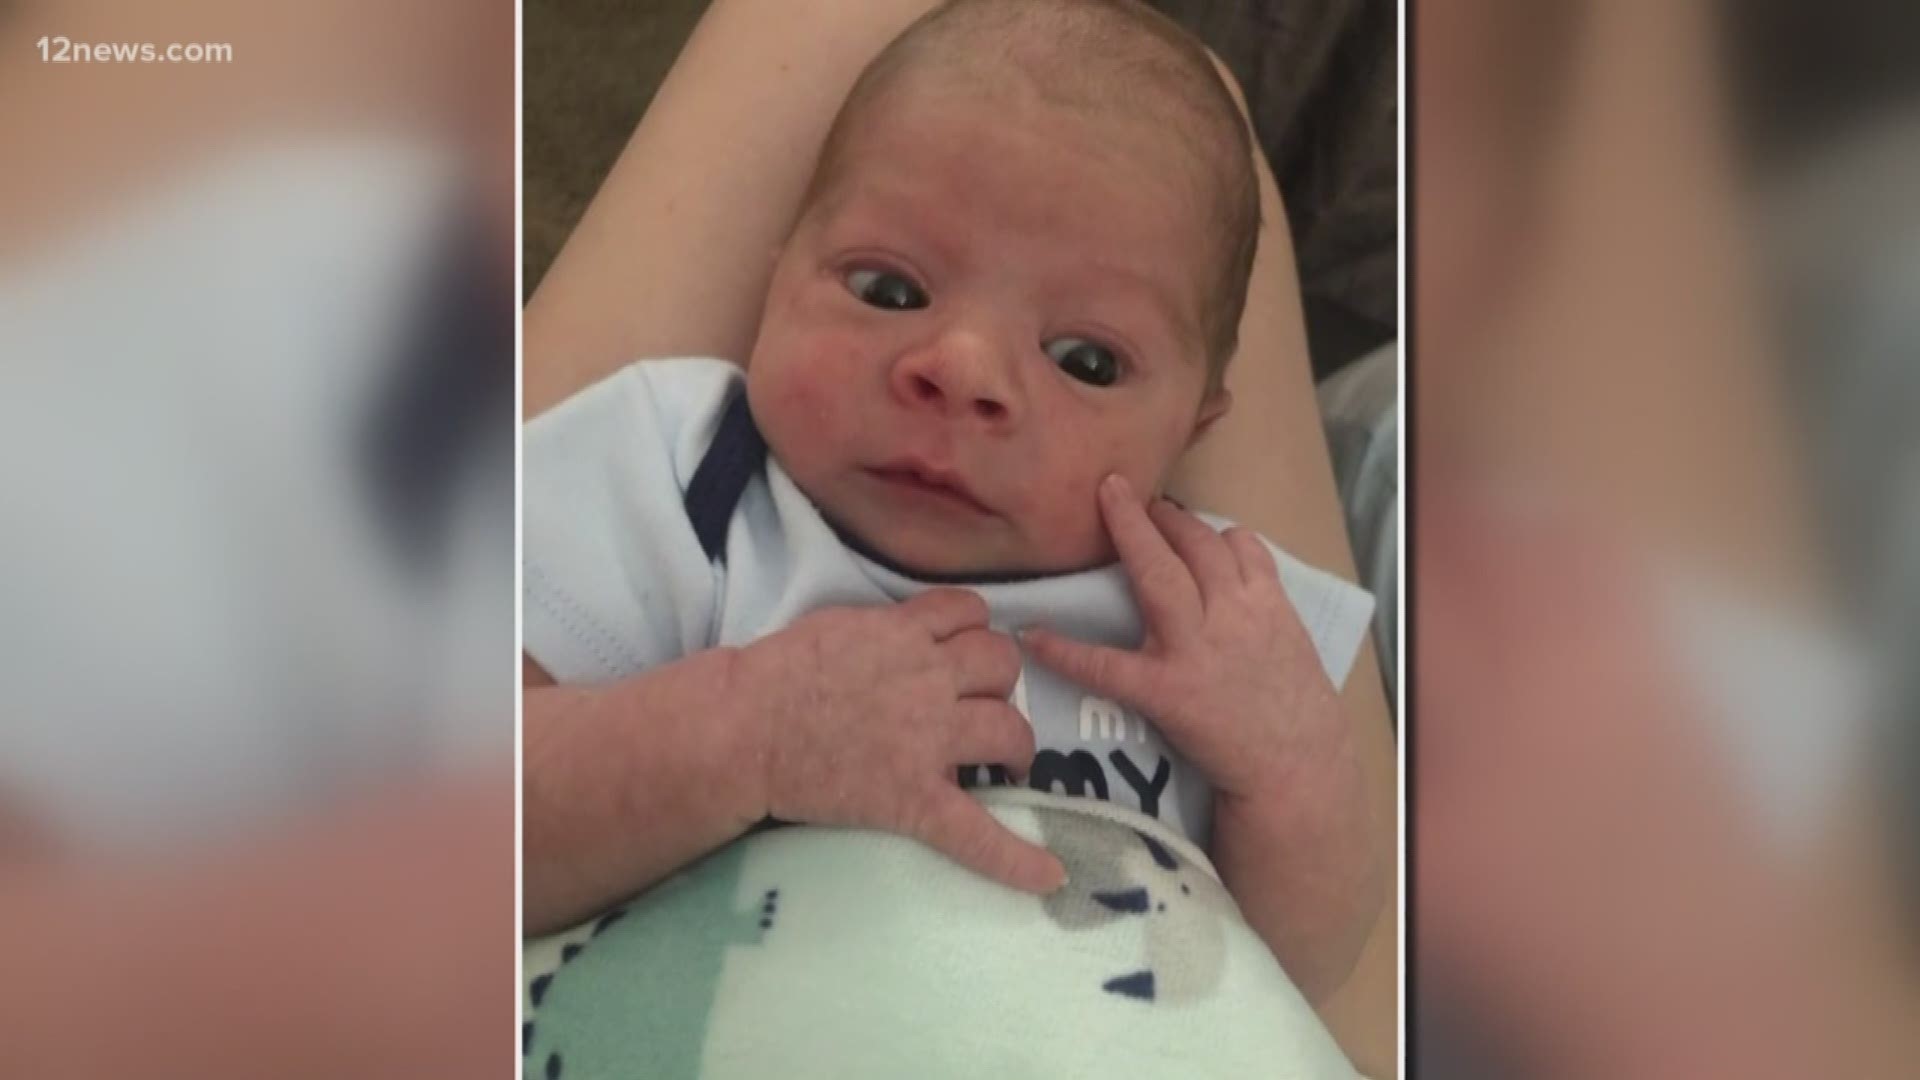 A 4-week-old baby boy was reported abducted at a Chandler park. His 19-year-old mother is now the prime suspect after he was found dead in his mother's apartment. Chandler police do not believe the baby was abducted.